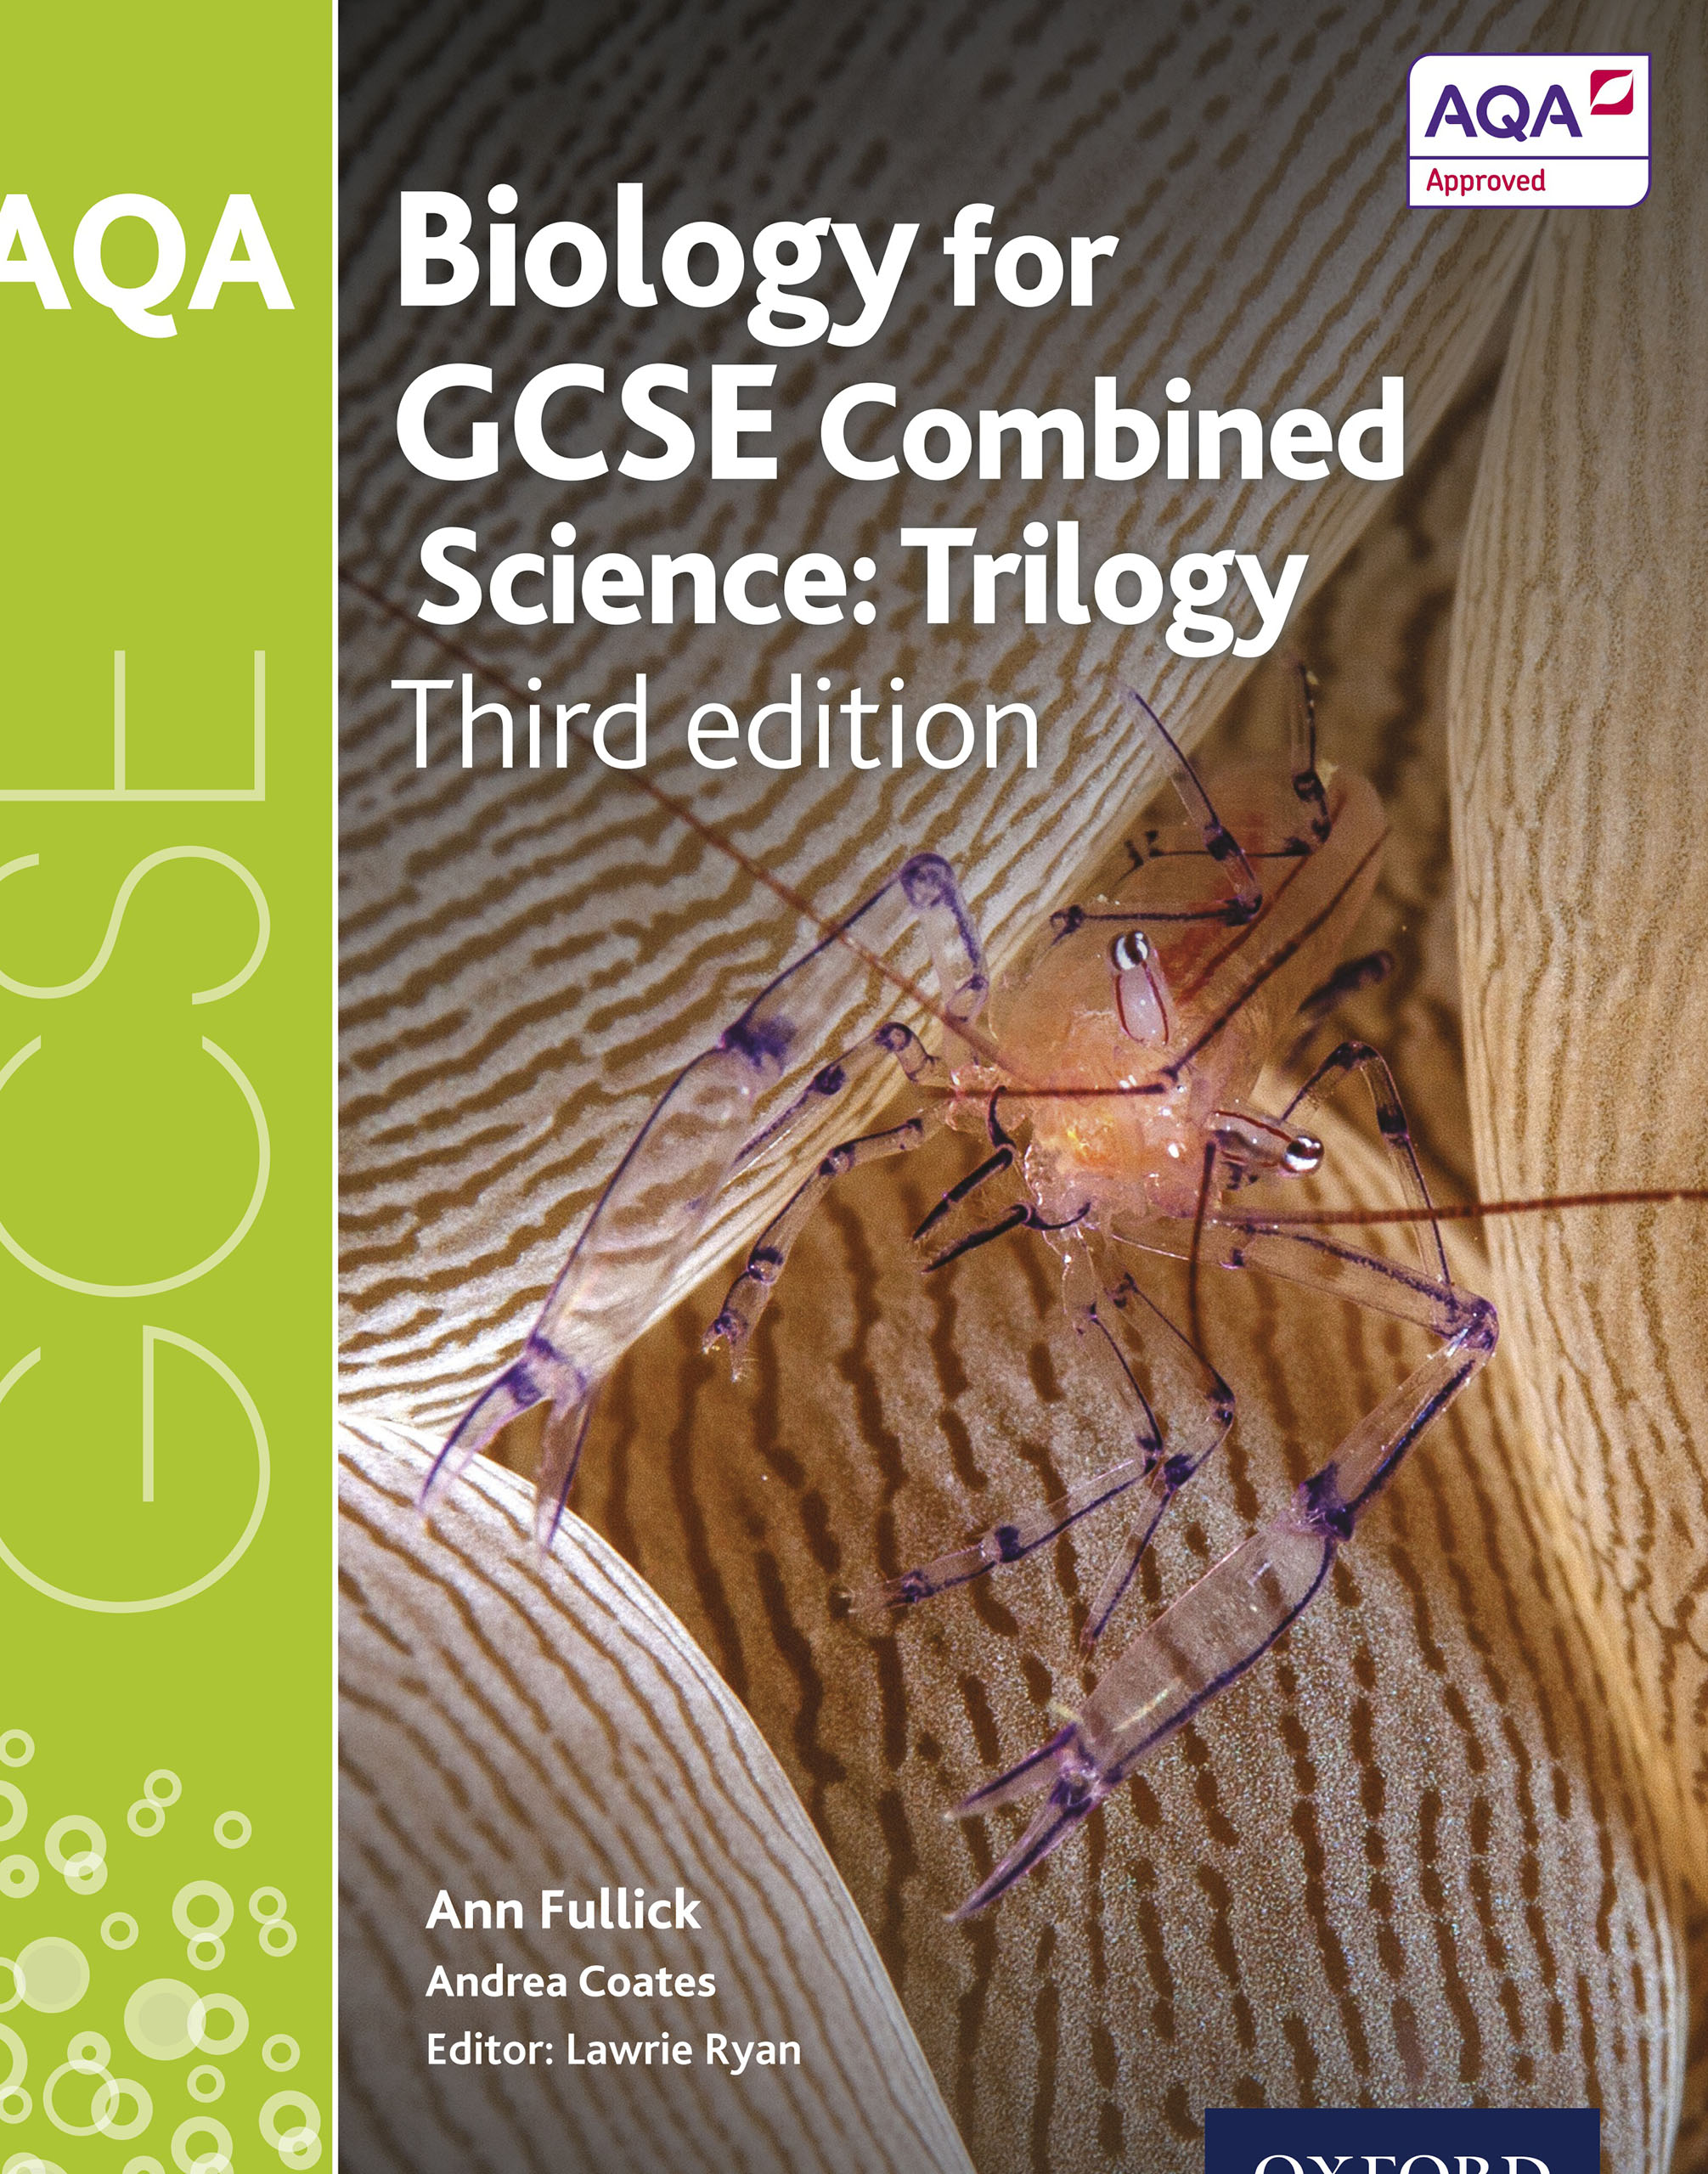 AQA GCSE Biology for Combined Science